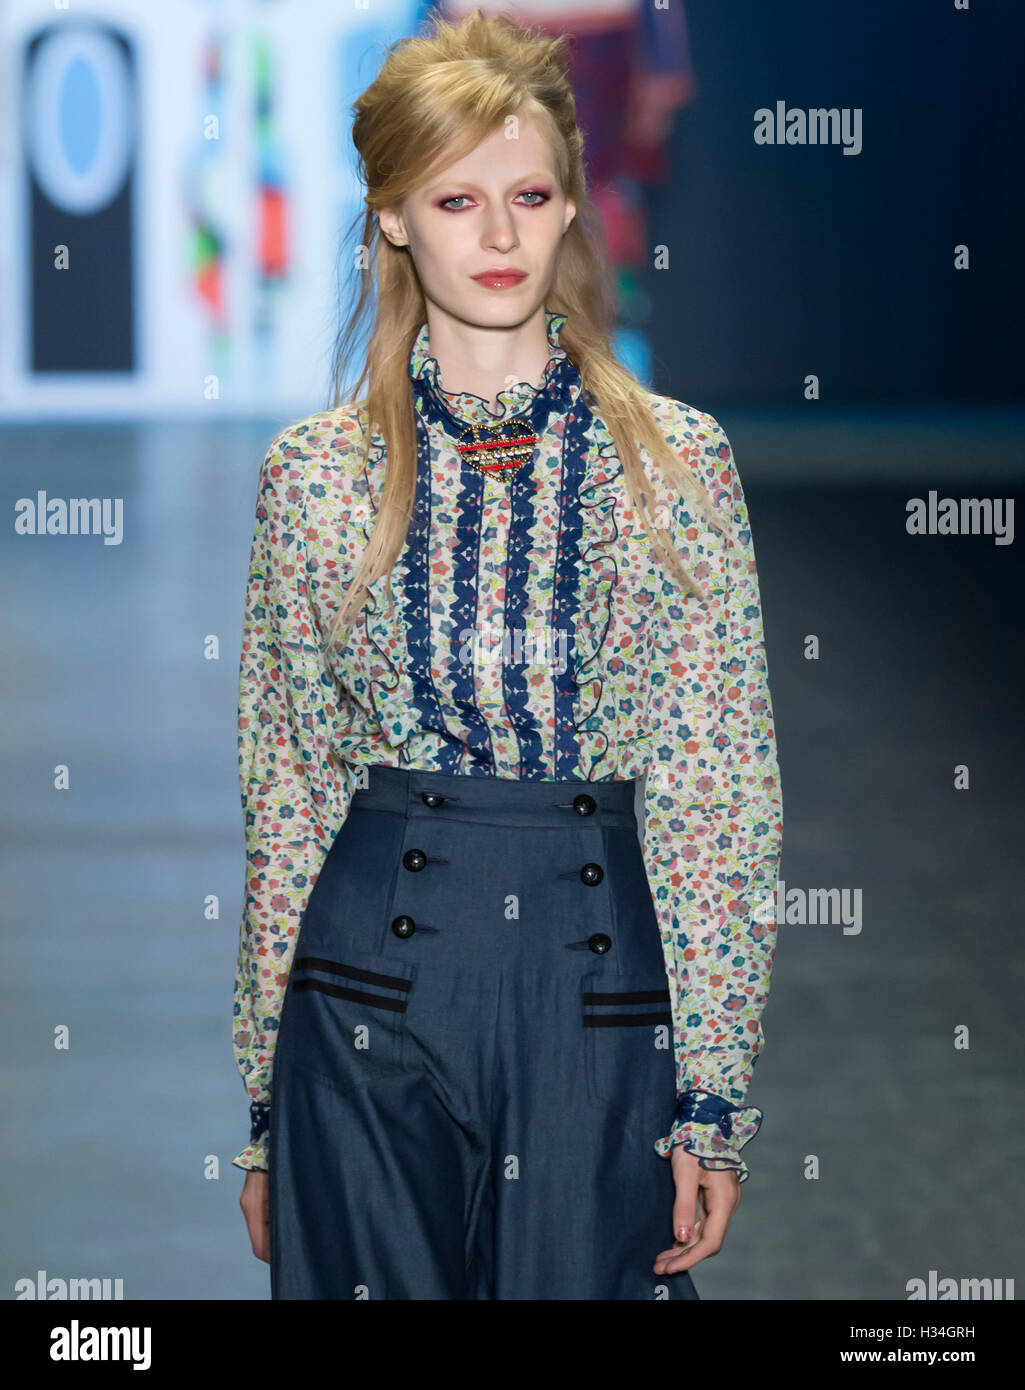 NEW YORK, NY - SEPTEMBER 14, 2016: A model walks the runway at the Anna Sui Spring Summer 2017 fashion show during NYFW Stock Photo